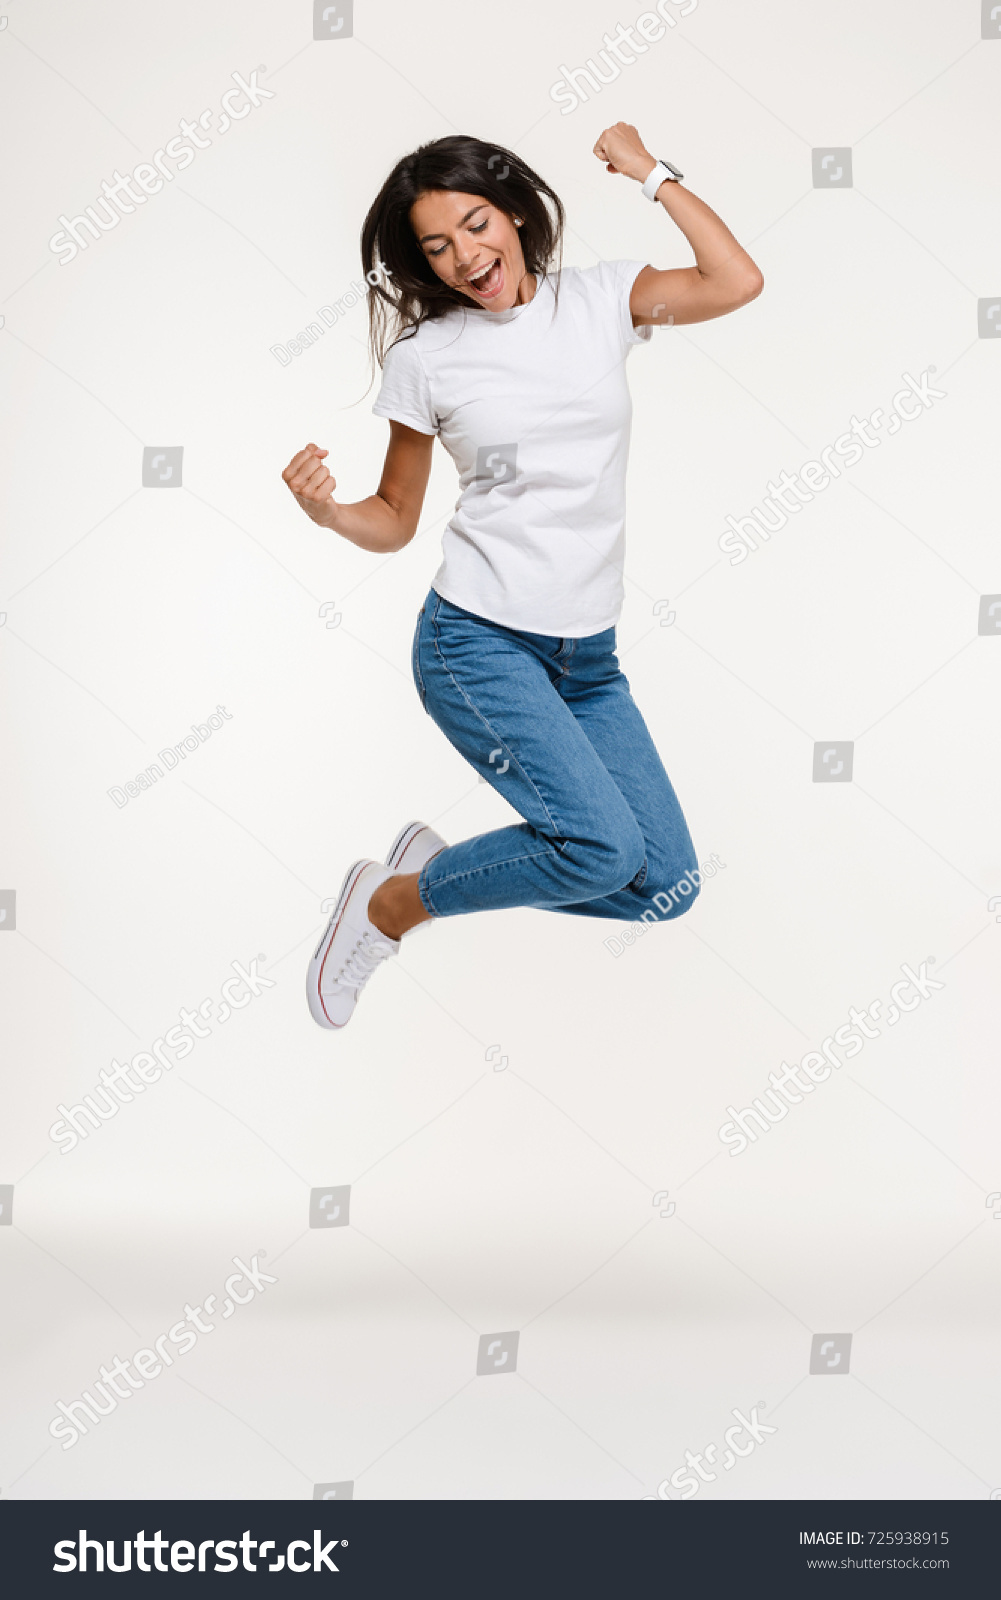 Full length portrait of a pretty joyful woman jumping isolated over white background #725938915